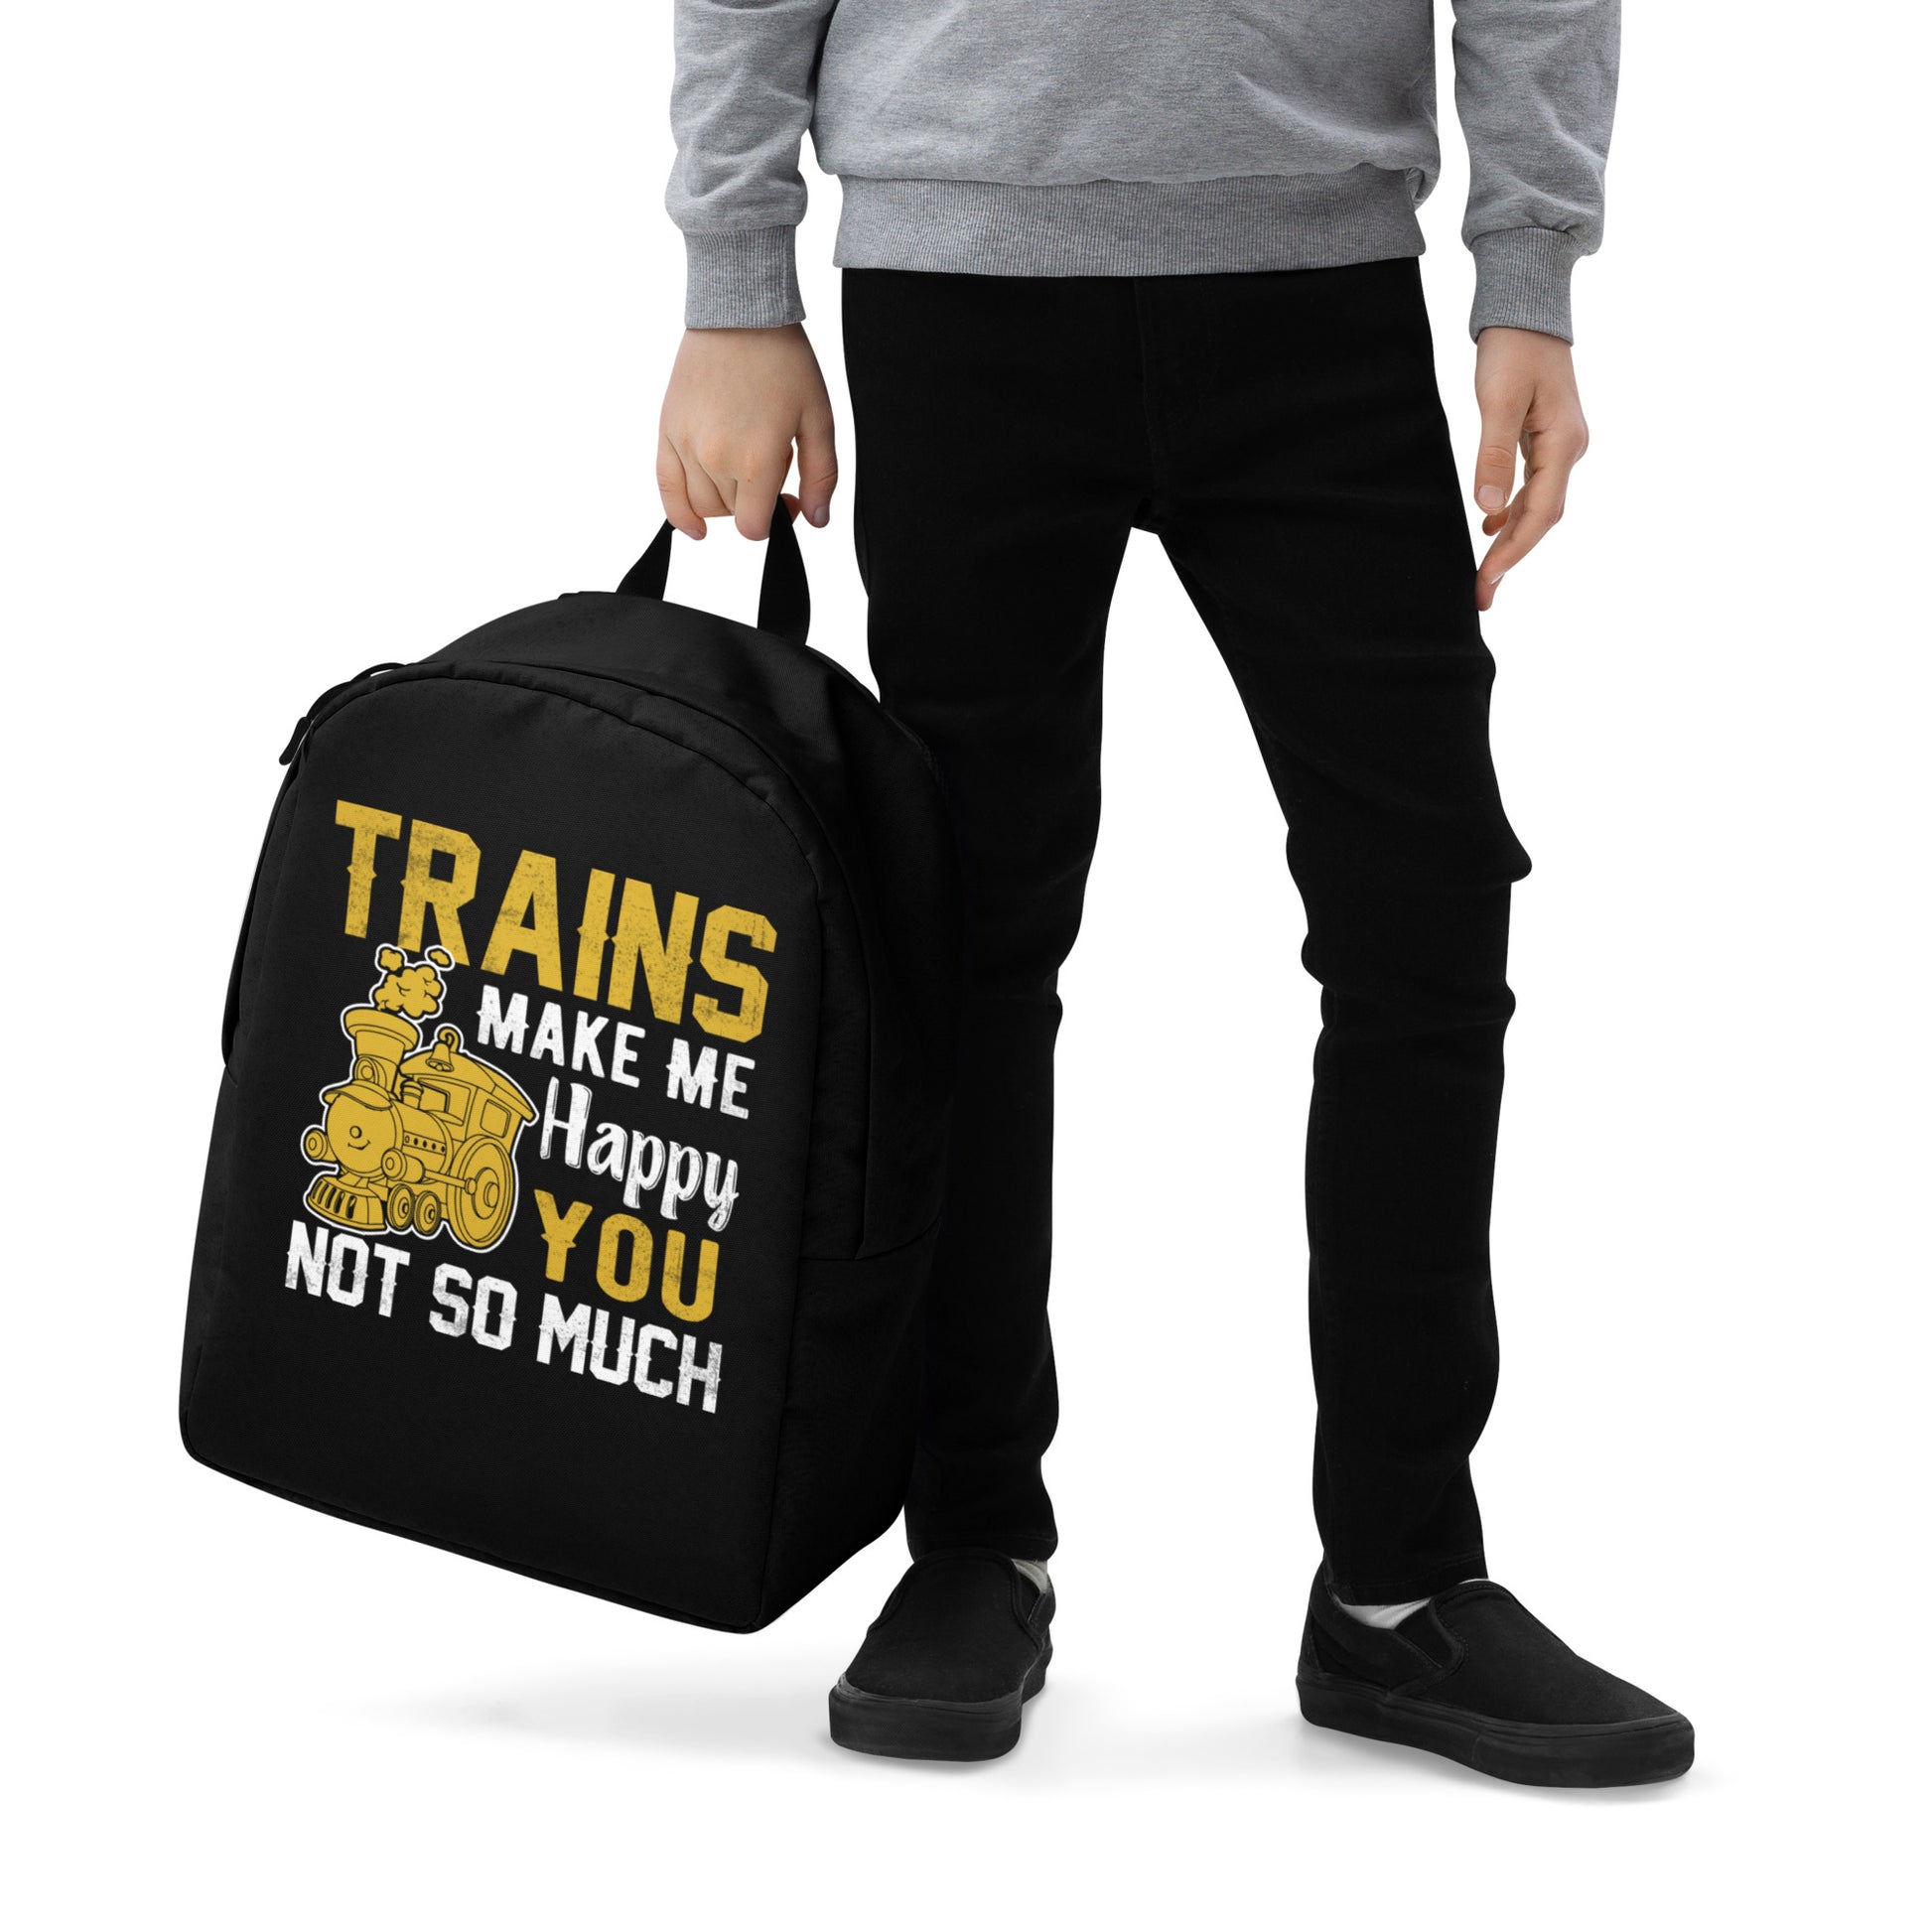 Trains Make Me Happy You Not So Much Minimalist Backpack - Broken Knuckle Apparel